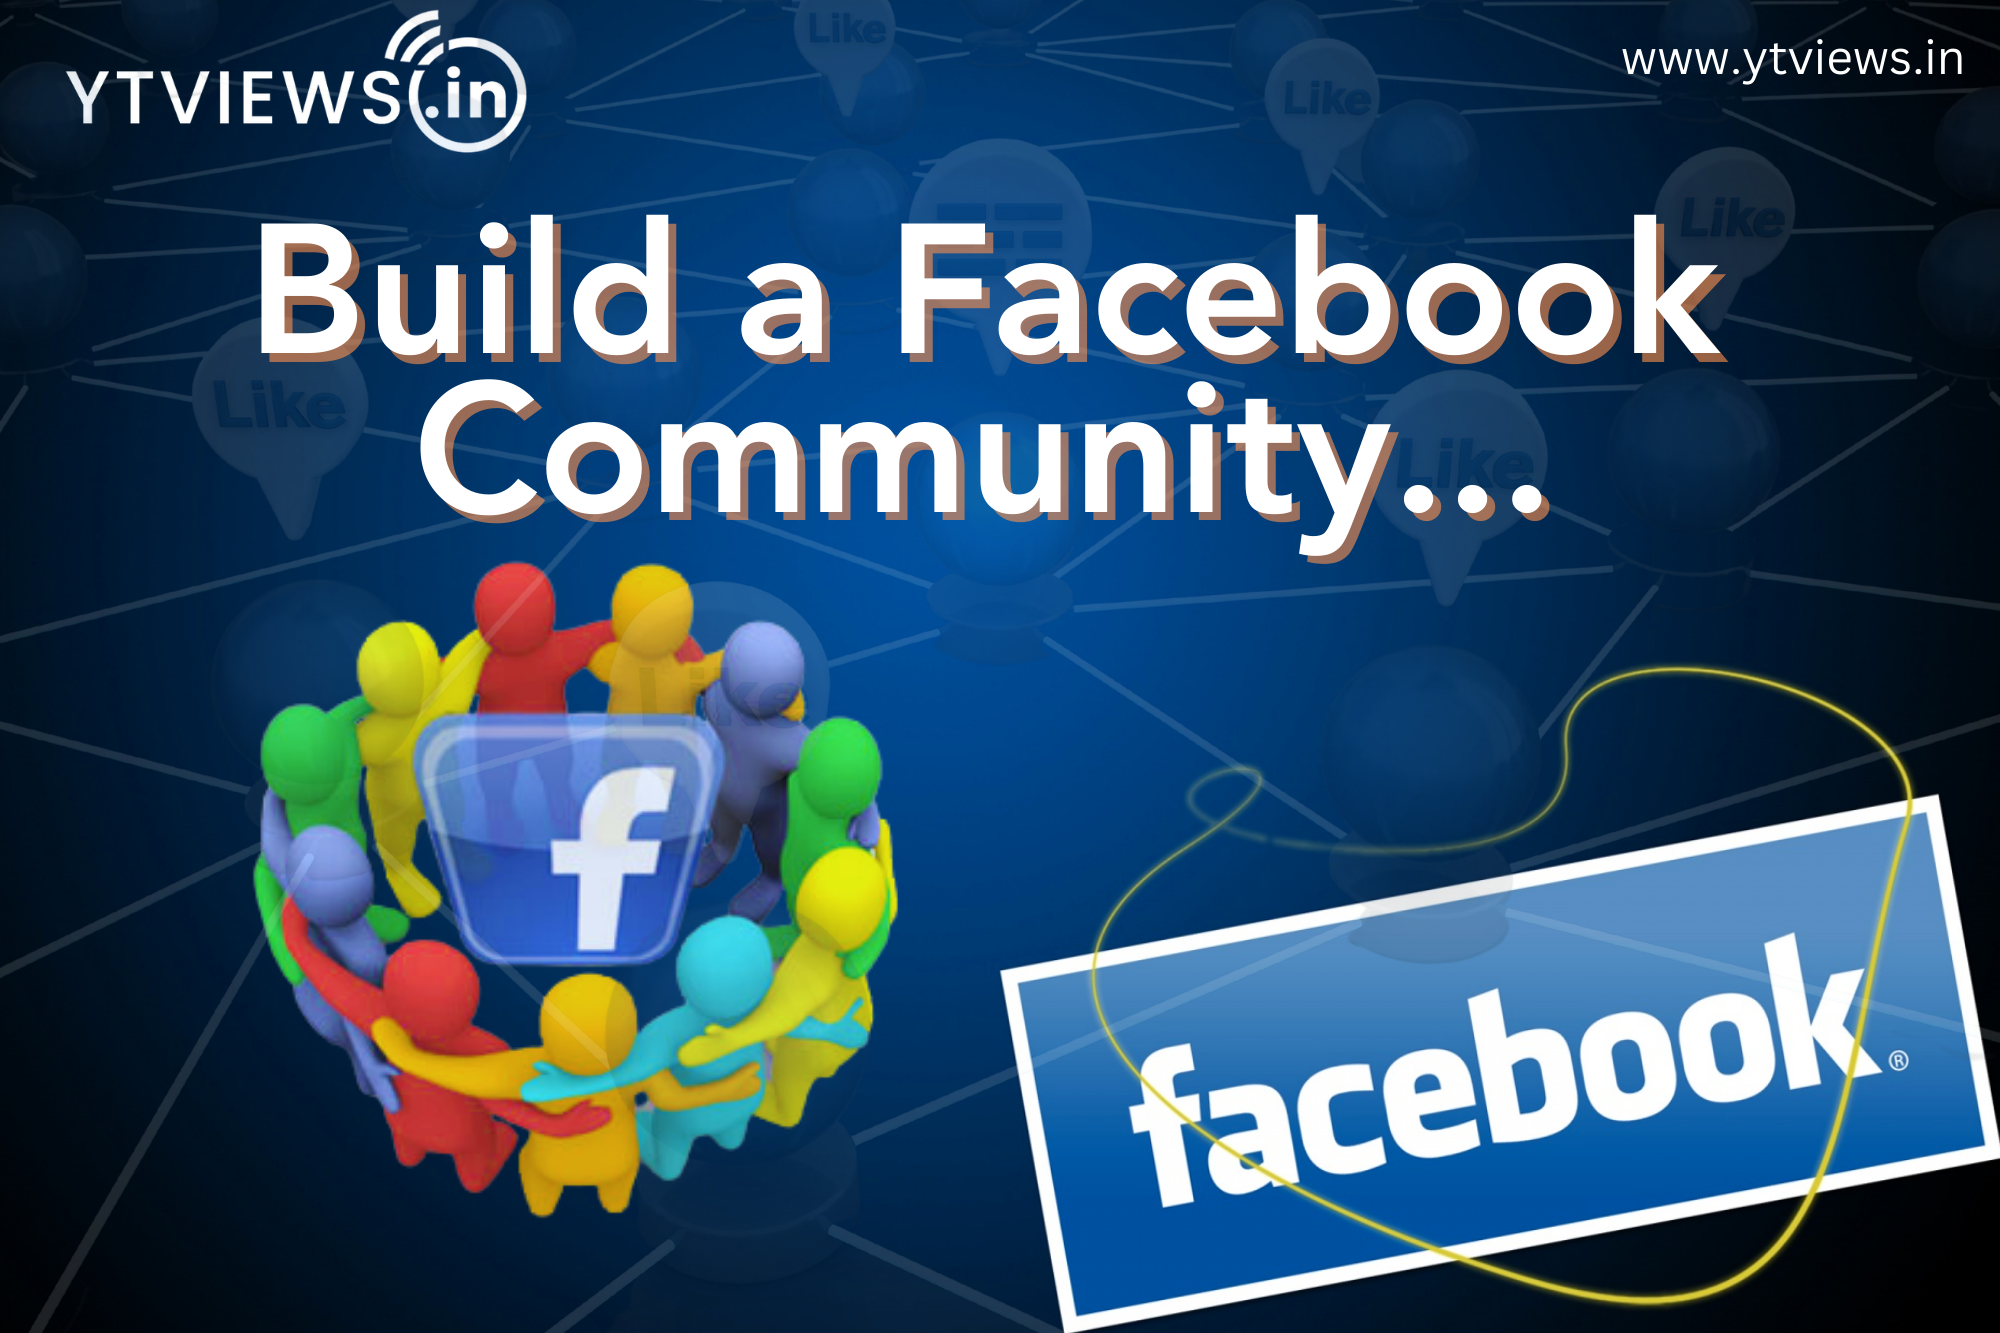 Here is how you can use Facebook to build a community for your brand